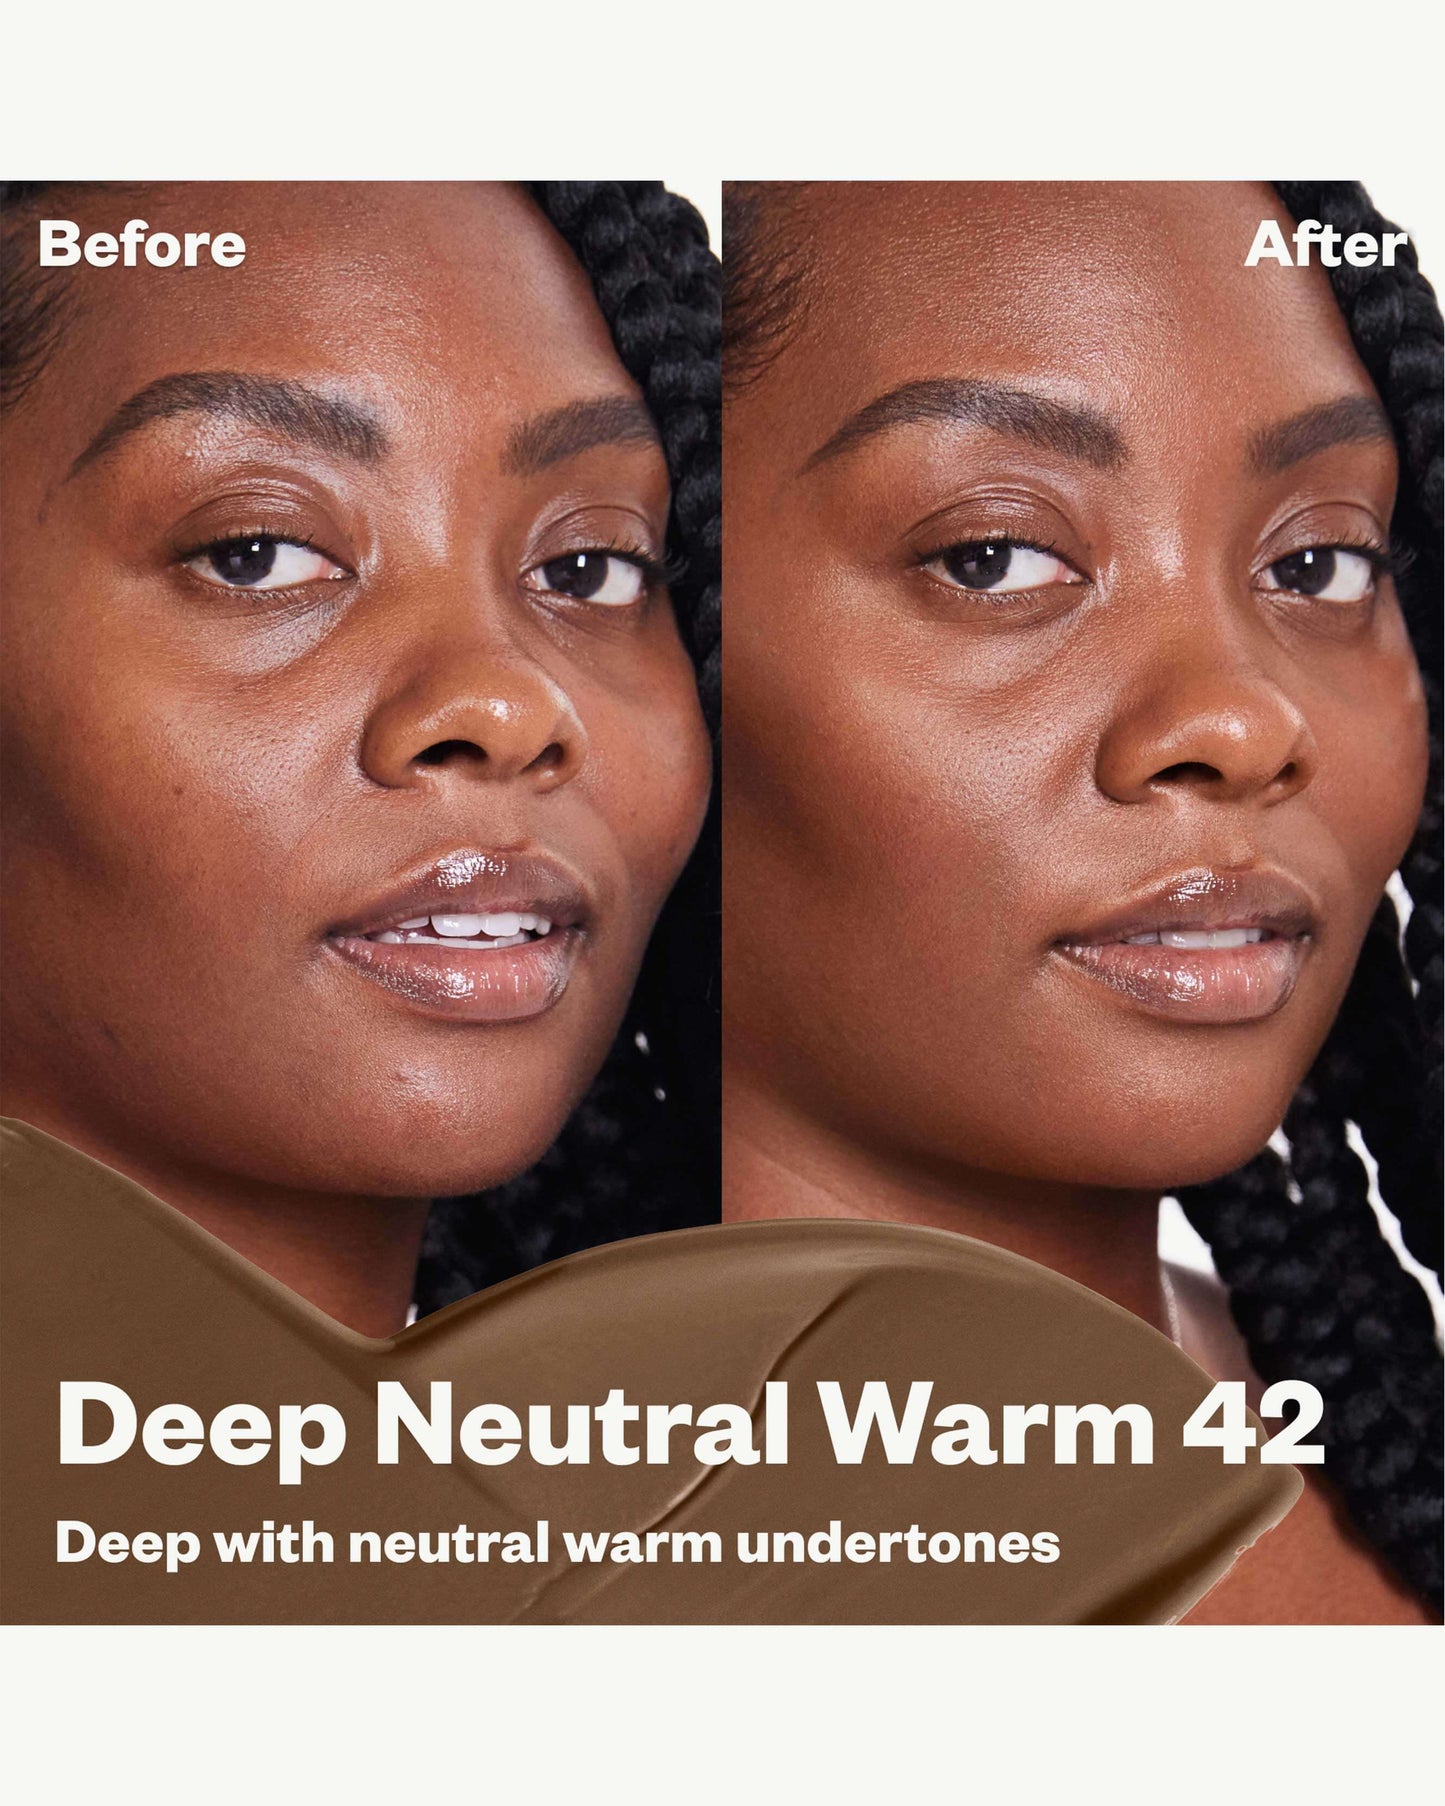 42 NW (deep with neutral warm undertones)